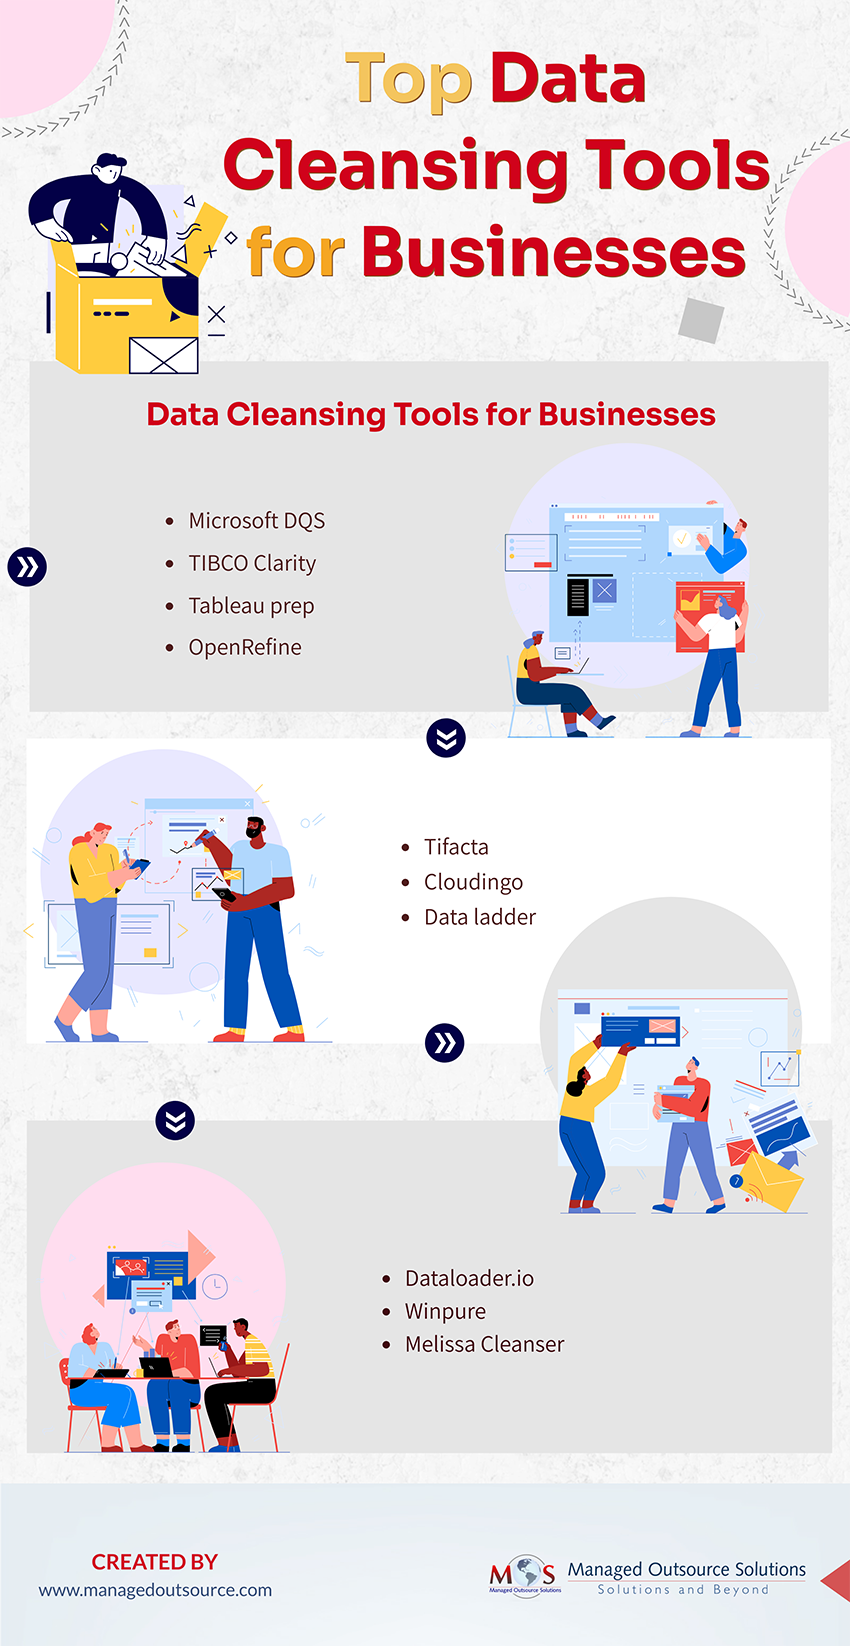 Top Data Cleansing Tools for Businesses